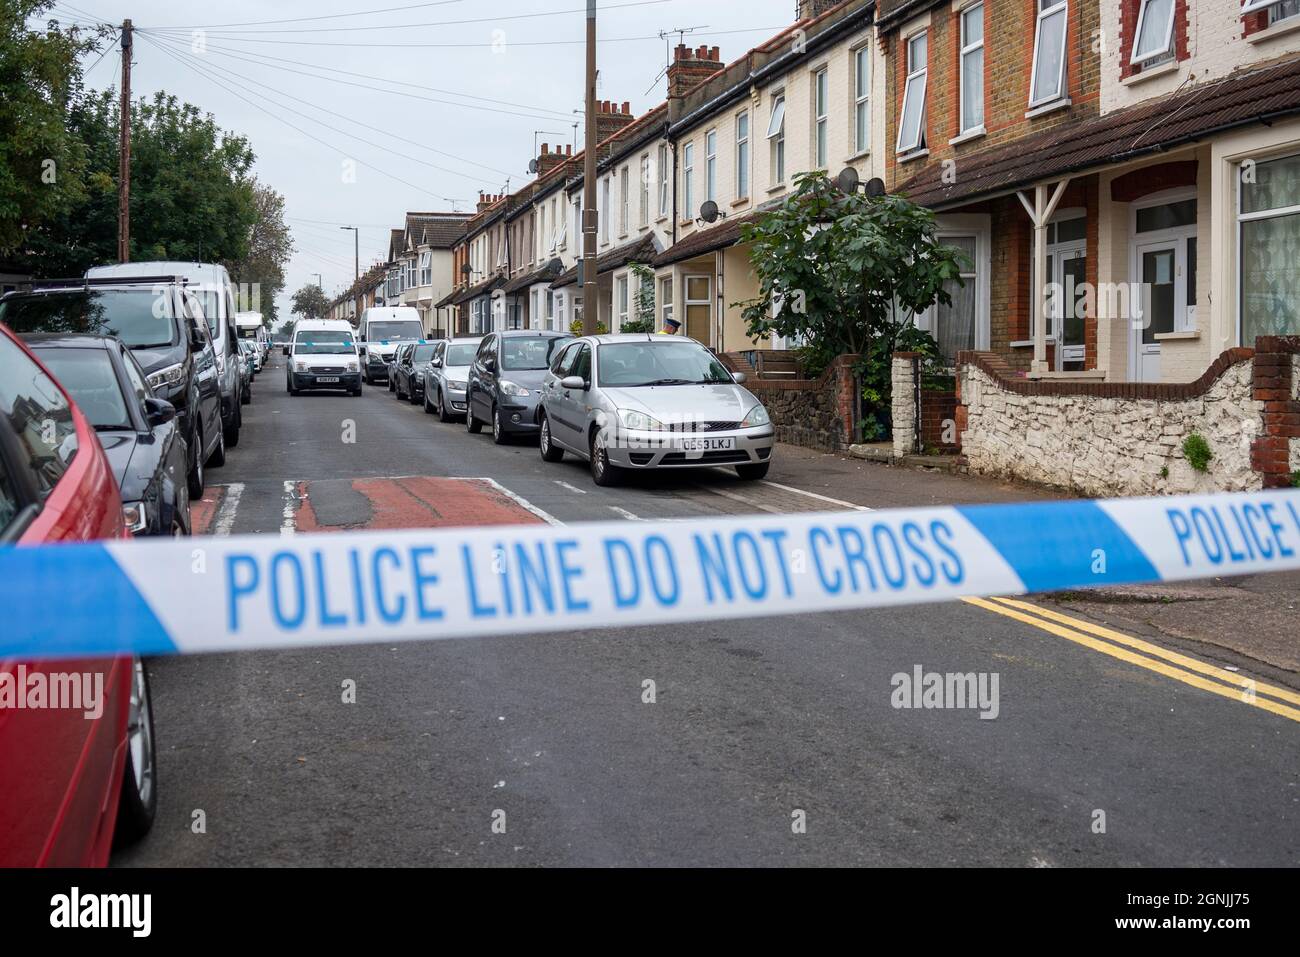 Hainault Avenue, Westcliff on Sea, Essex, UK. 26th Sep, 2021. Hainault Avenue in Westcliff has been closed off by police since around 23:00 on Saturday night, the 25th Sep, 2021, with unconfirmed reports of a murder. Various police vans and vehicles have been seen entering the closed area. The road is still closed at 10:00 Sunday morning. UPDATE: It has been confirmed that a male, James Avis, succumbed to injuries sustained during an attack despite the efforts of paramedics on scene. Two males aged 24 (Radu Ciobanu) and 27 have been arrested on suspicion of murder Stock Photo